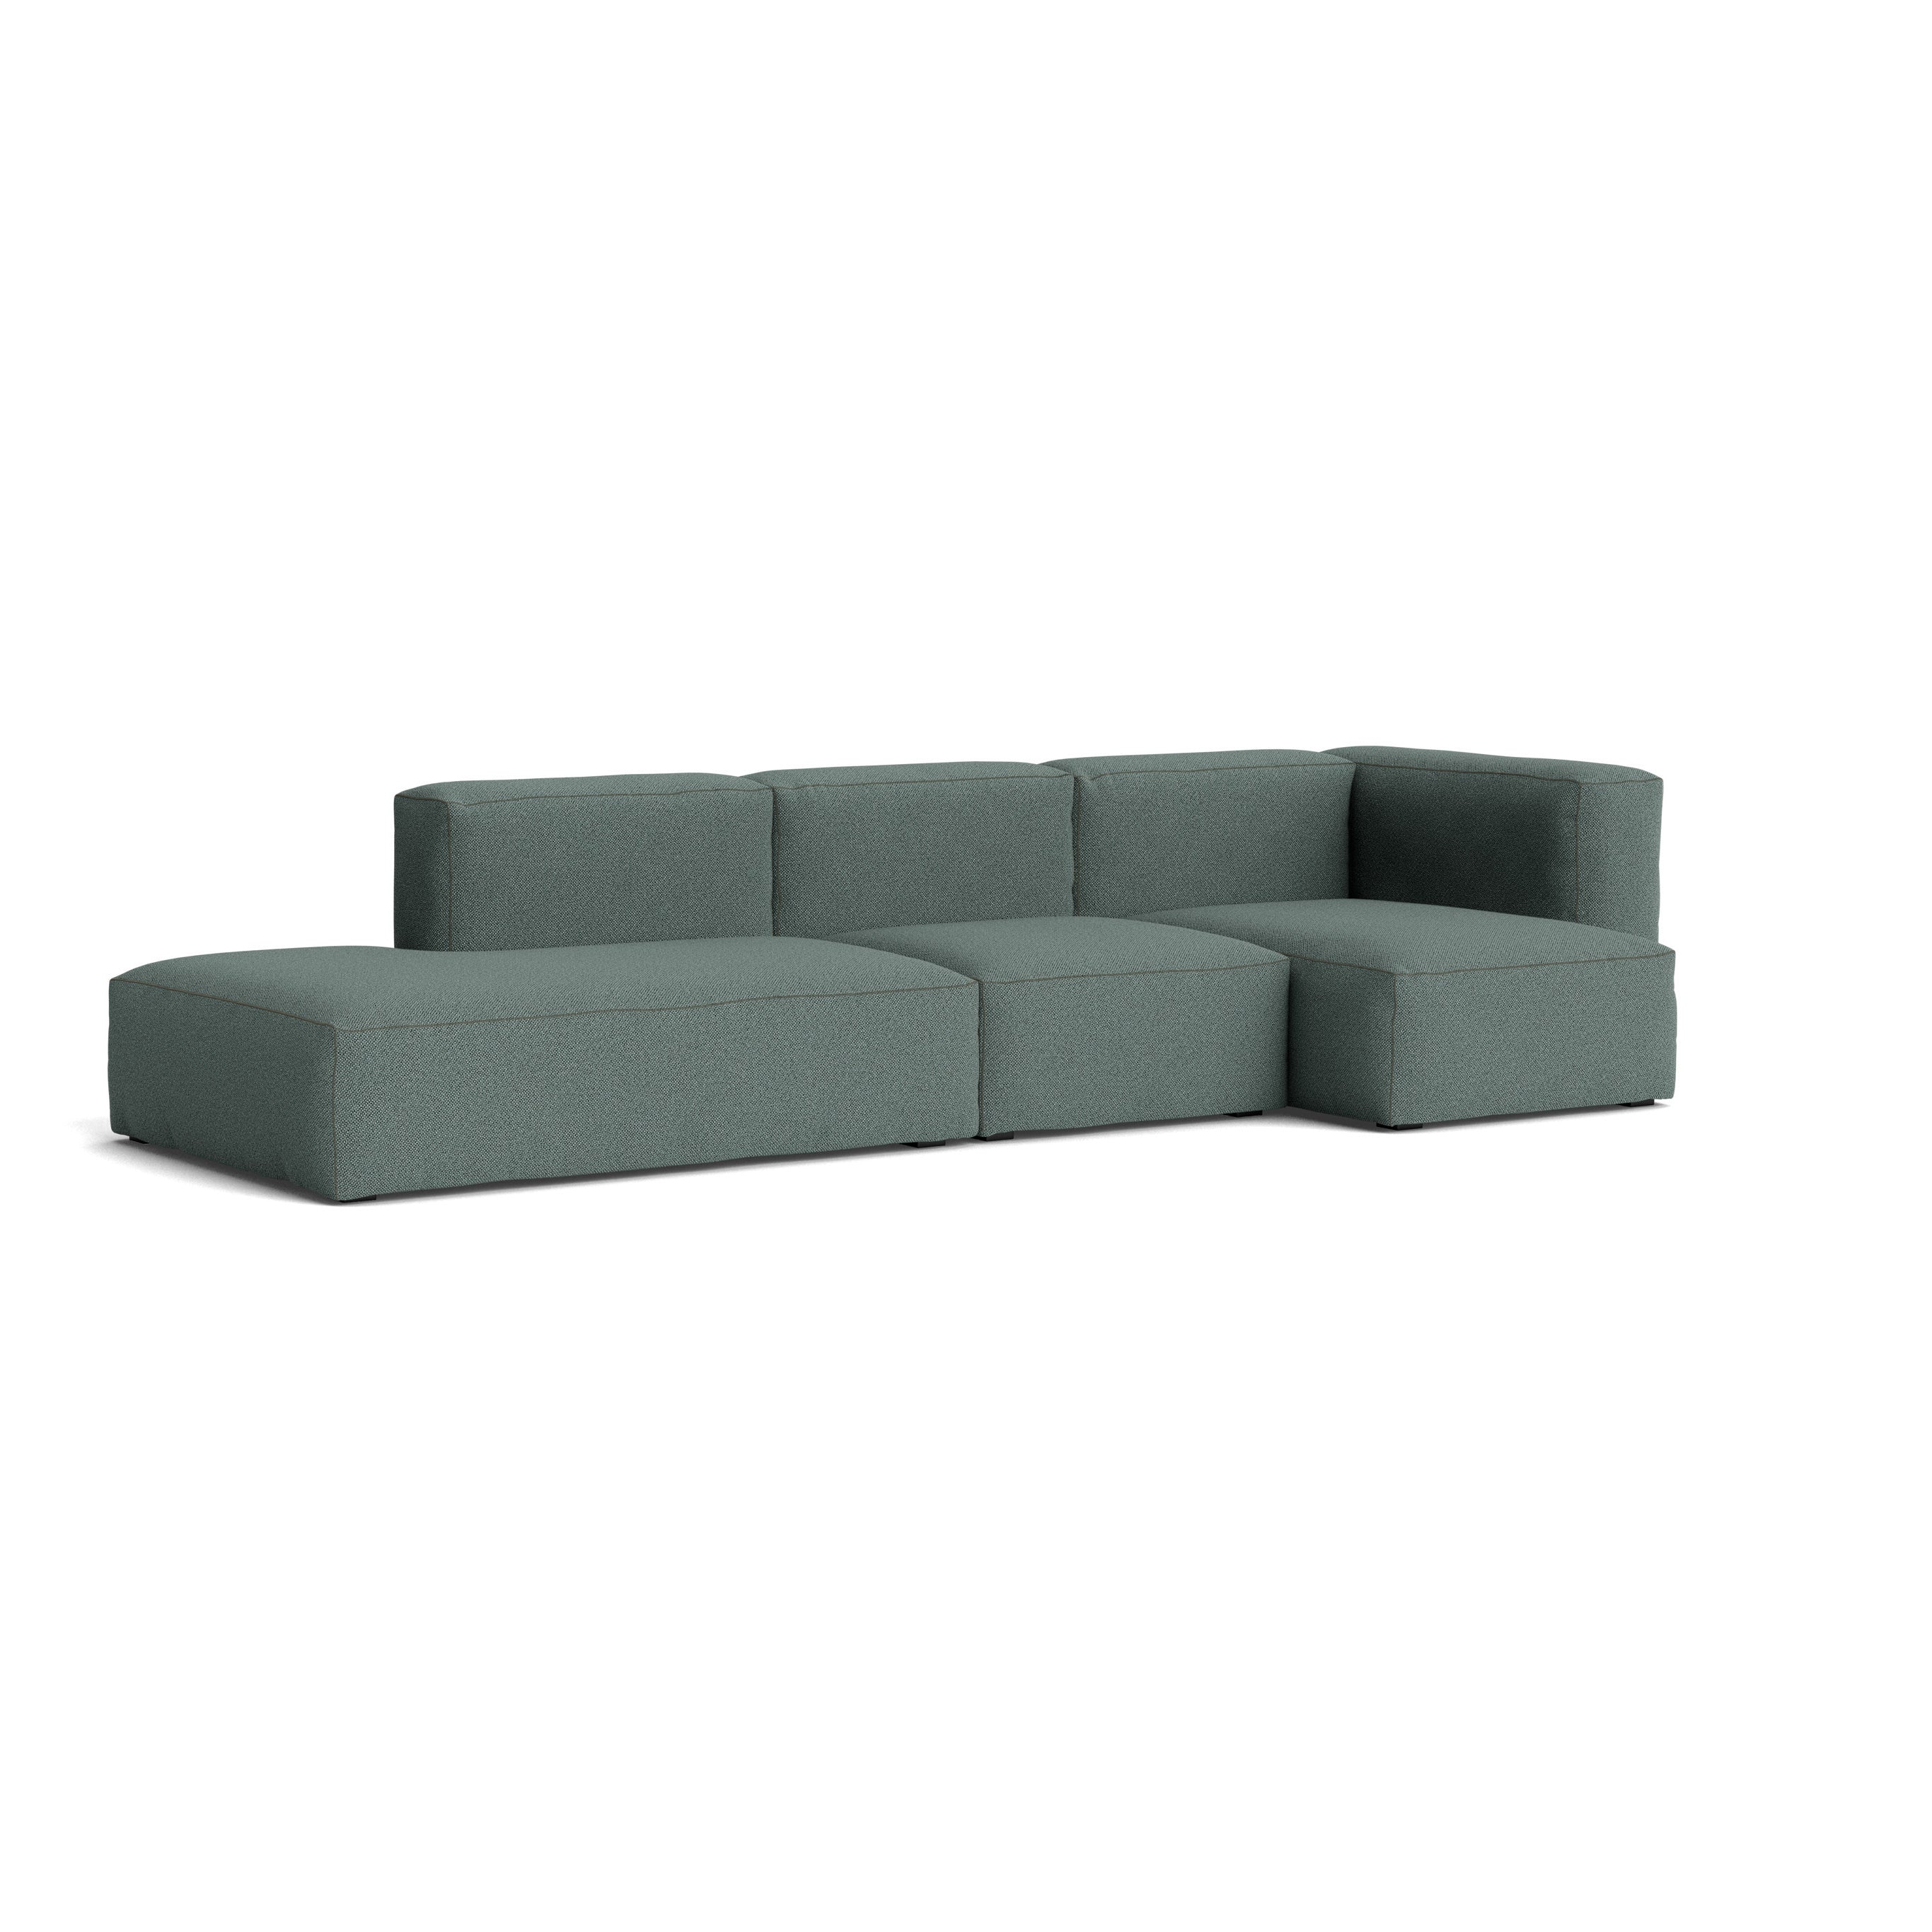 HAY Mags Soft Sofa 3 Seater - Combination 3